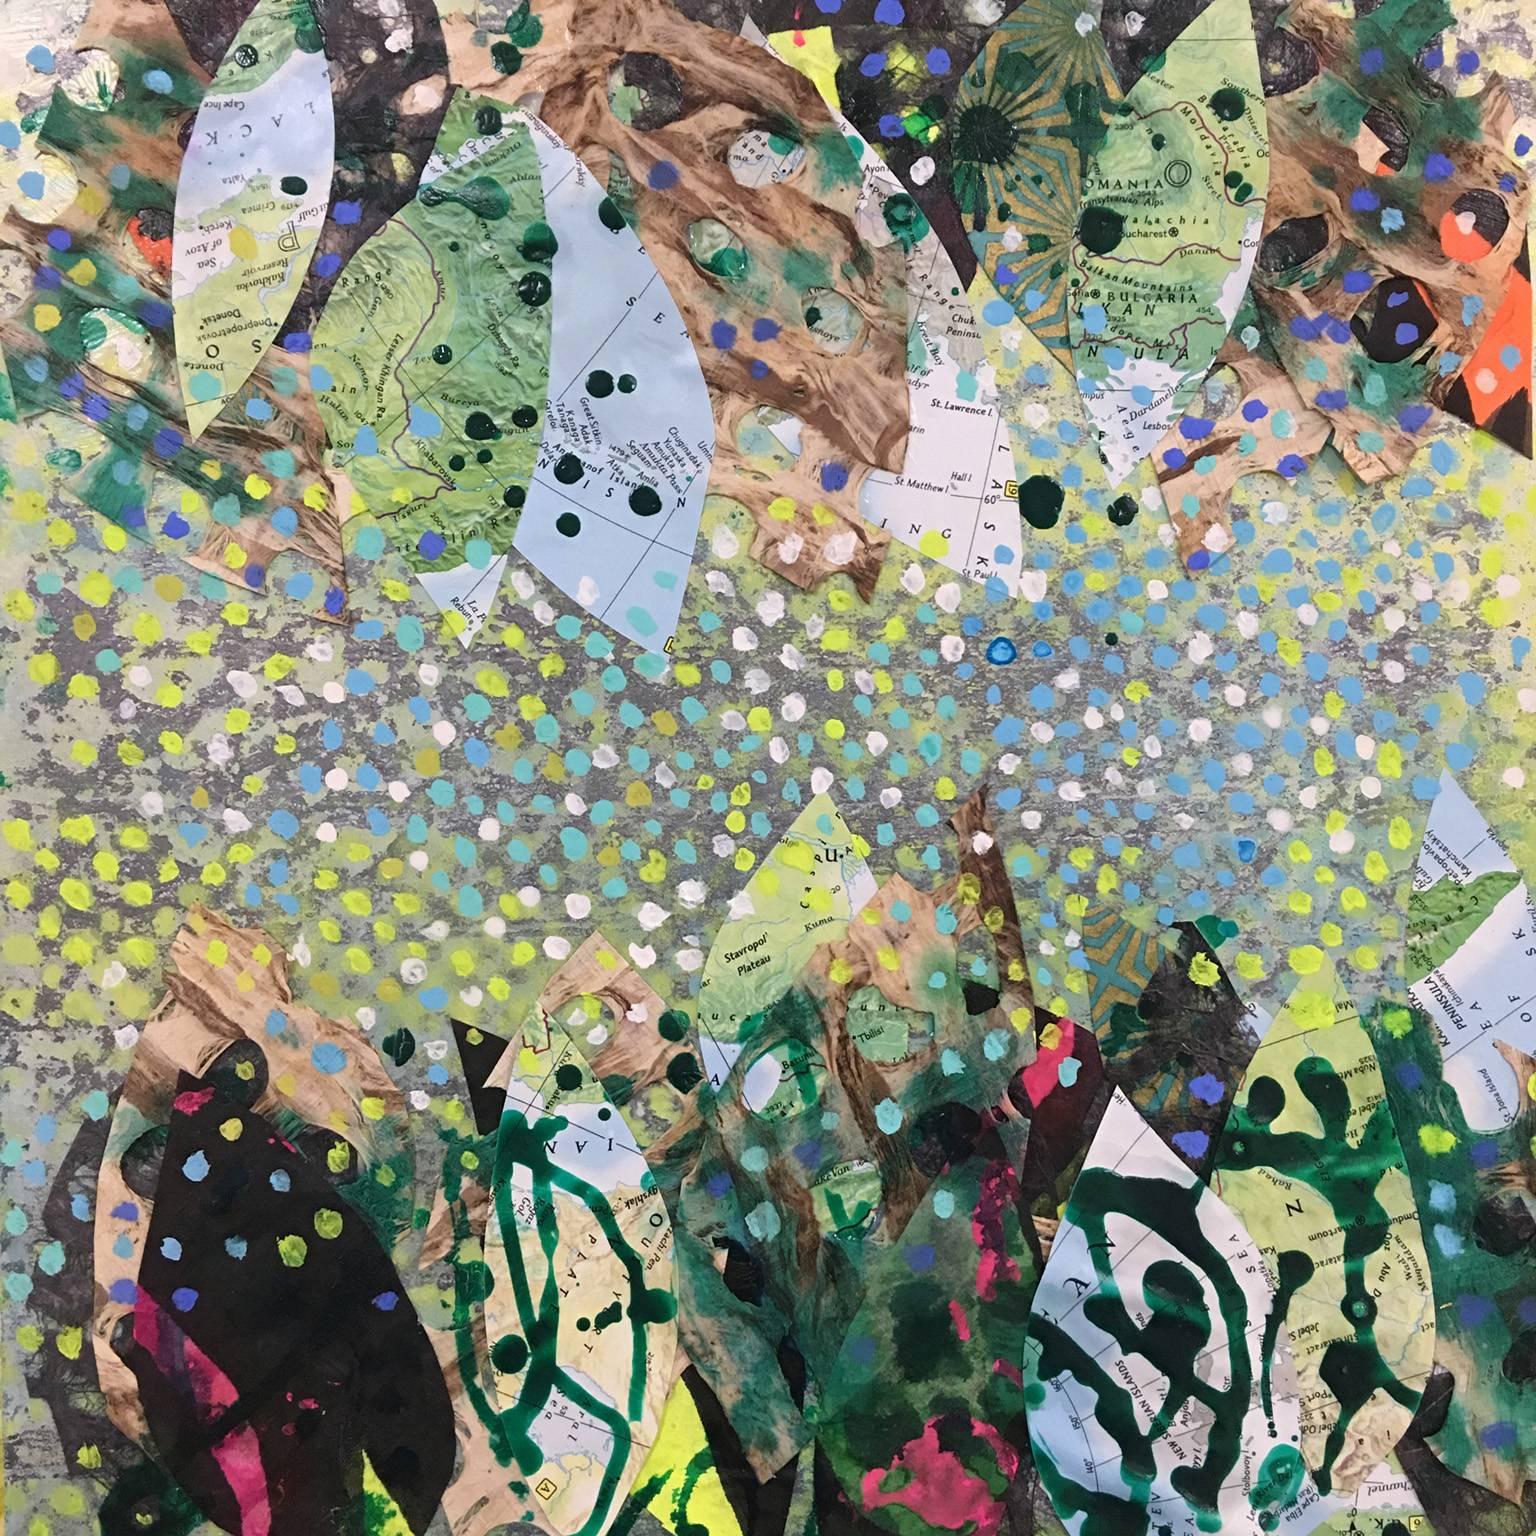 Rebecca Darlington Abstract Painting - “Joyeux Anniversaire to Spring”, patterns of leaves and dots in green and yellow